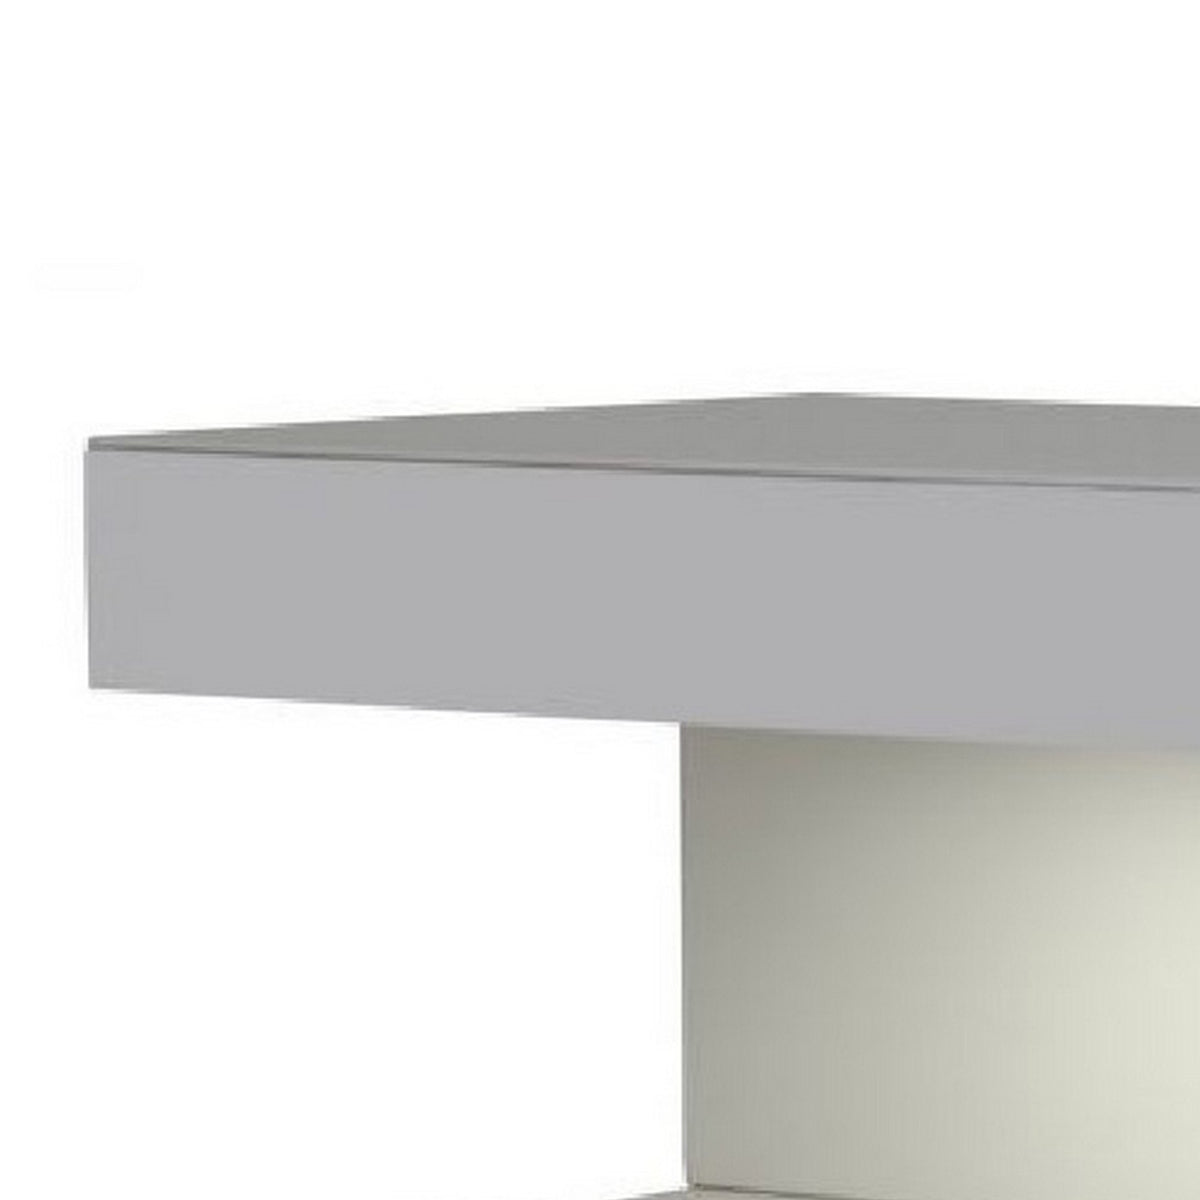 Contemporary Squared C Shaped Wooden Nightstand with LED Light, Gray - BM223472